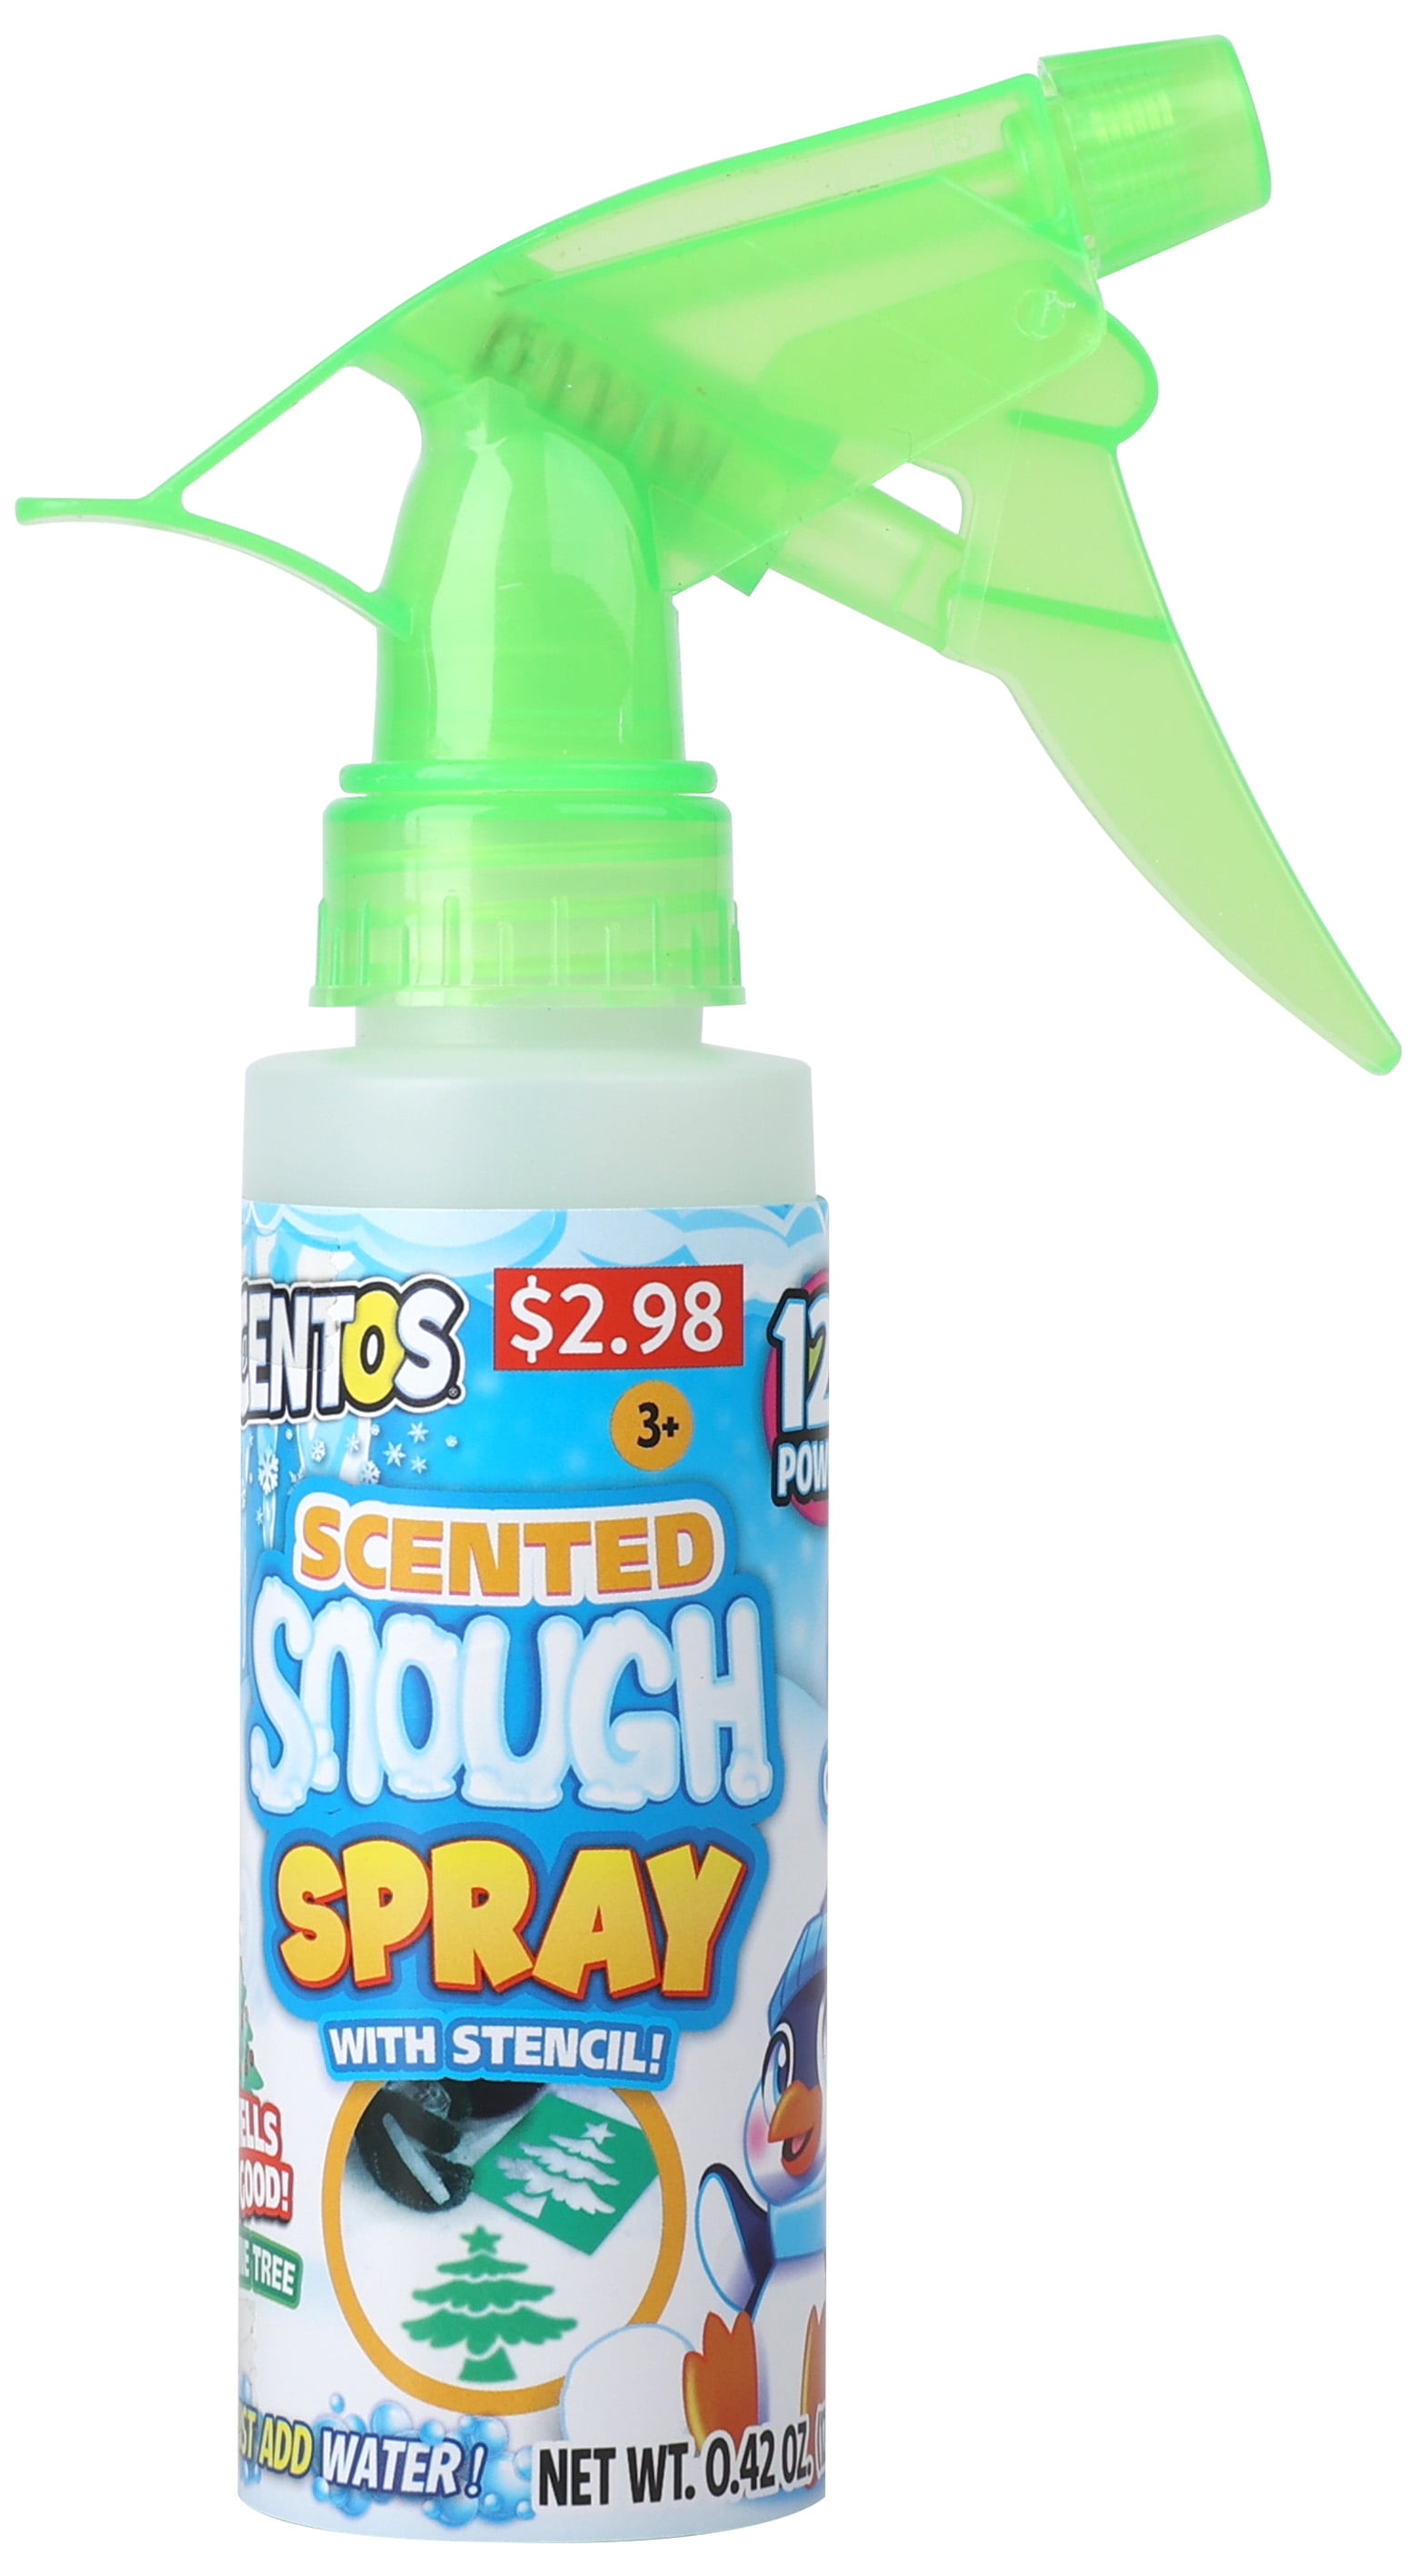 Scentos Holiday Scented Pine Snough Spray - Eco-Safe for Snow or Sand - Great Party Favors - 3+